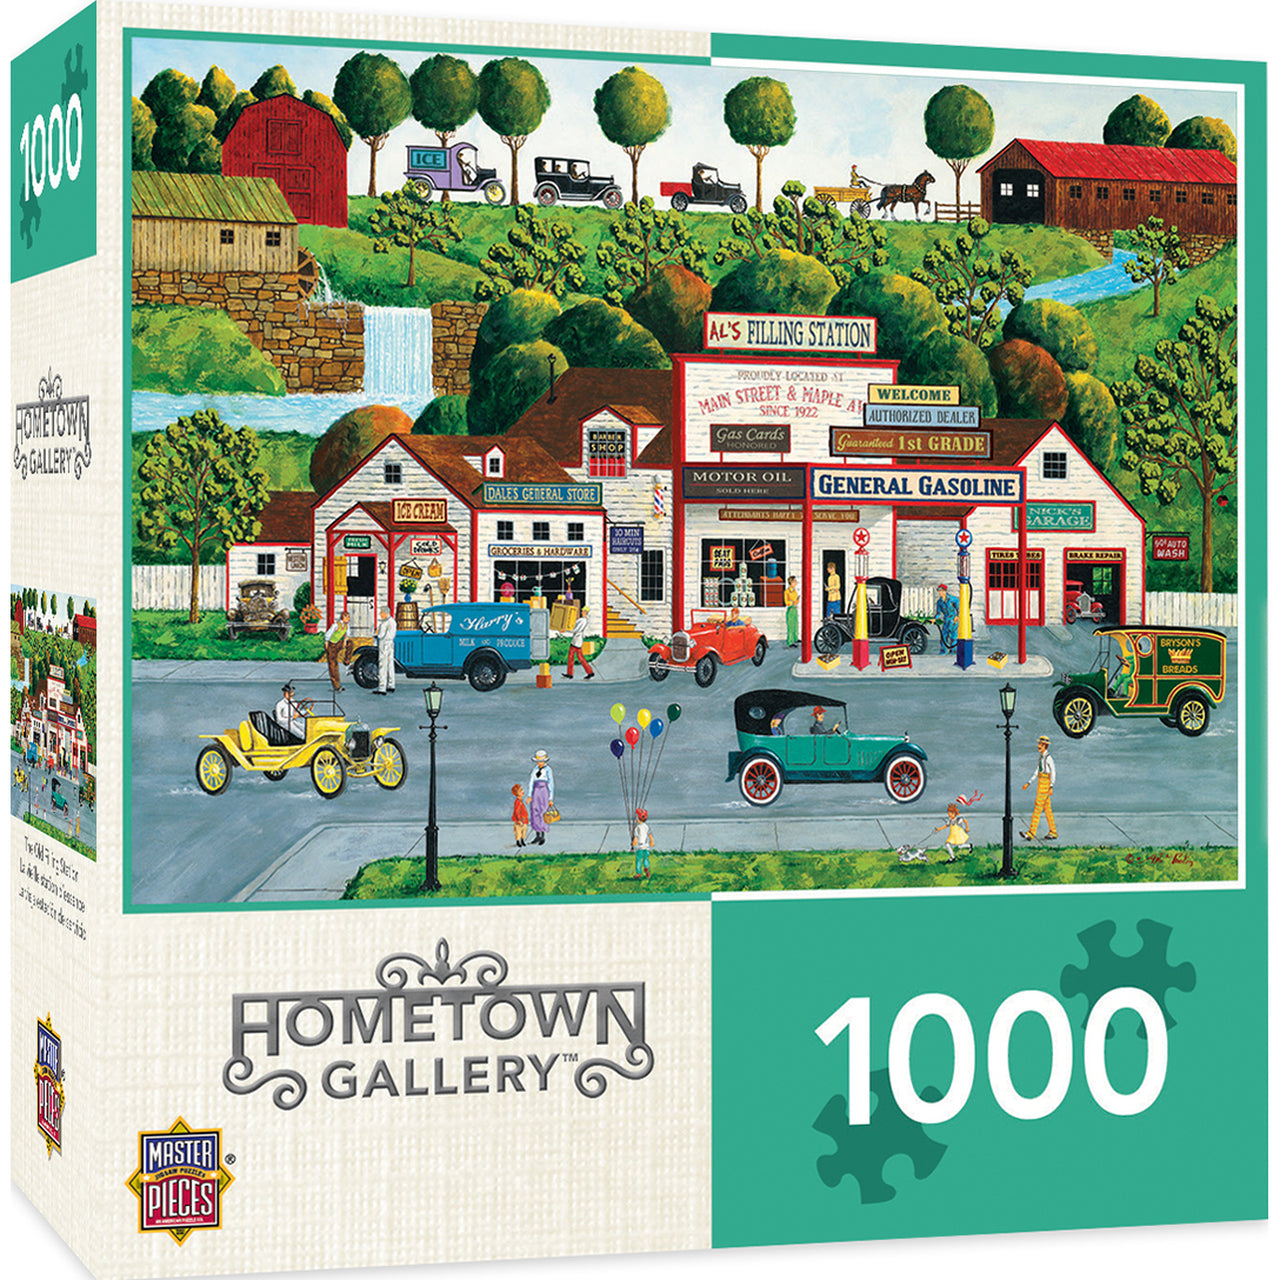 Hometown Gallery - The Old Filling Station 1000 Piece Jigsaw Puzzle by Masterpieces